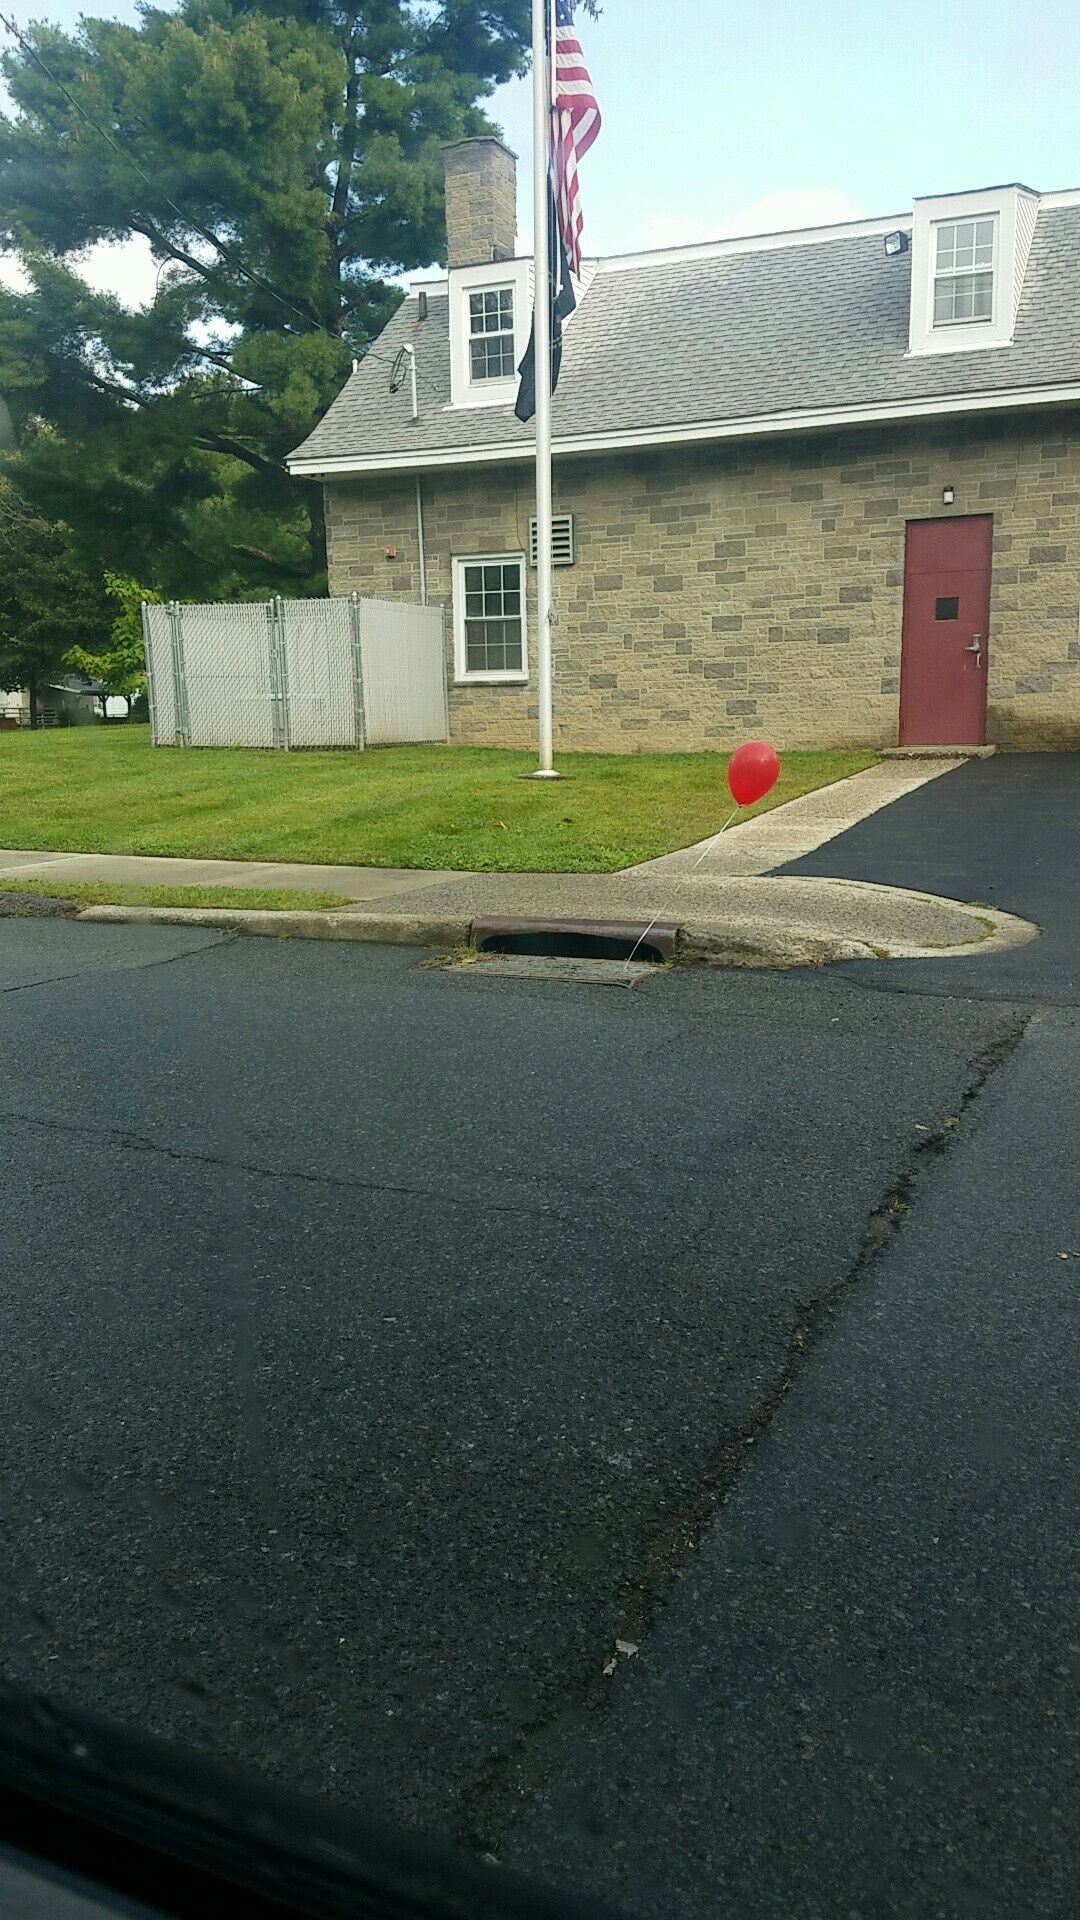 Someone in my neighborhood is very excited for the It premier